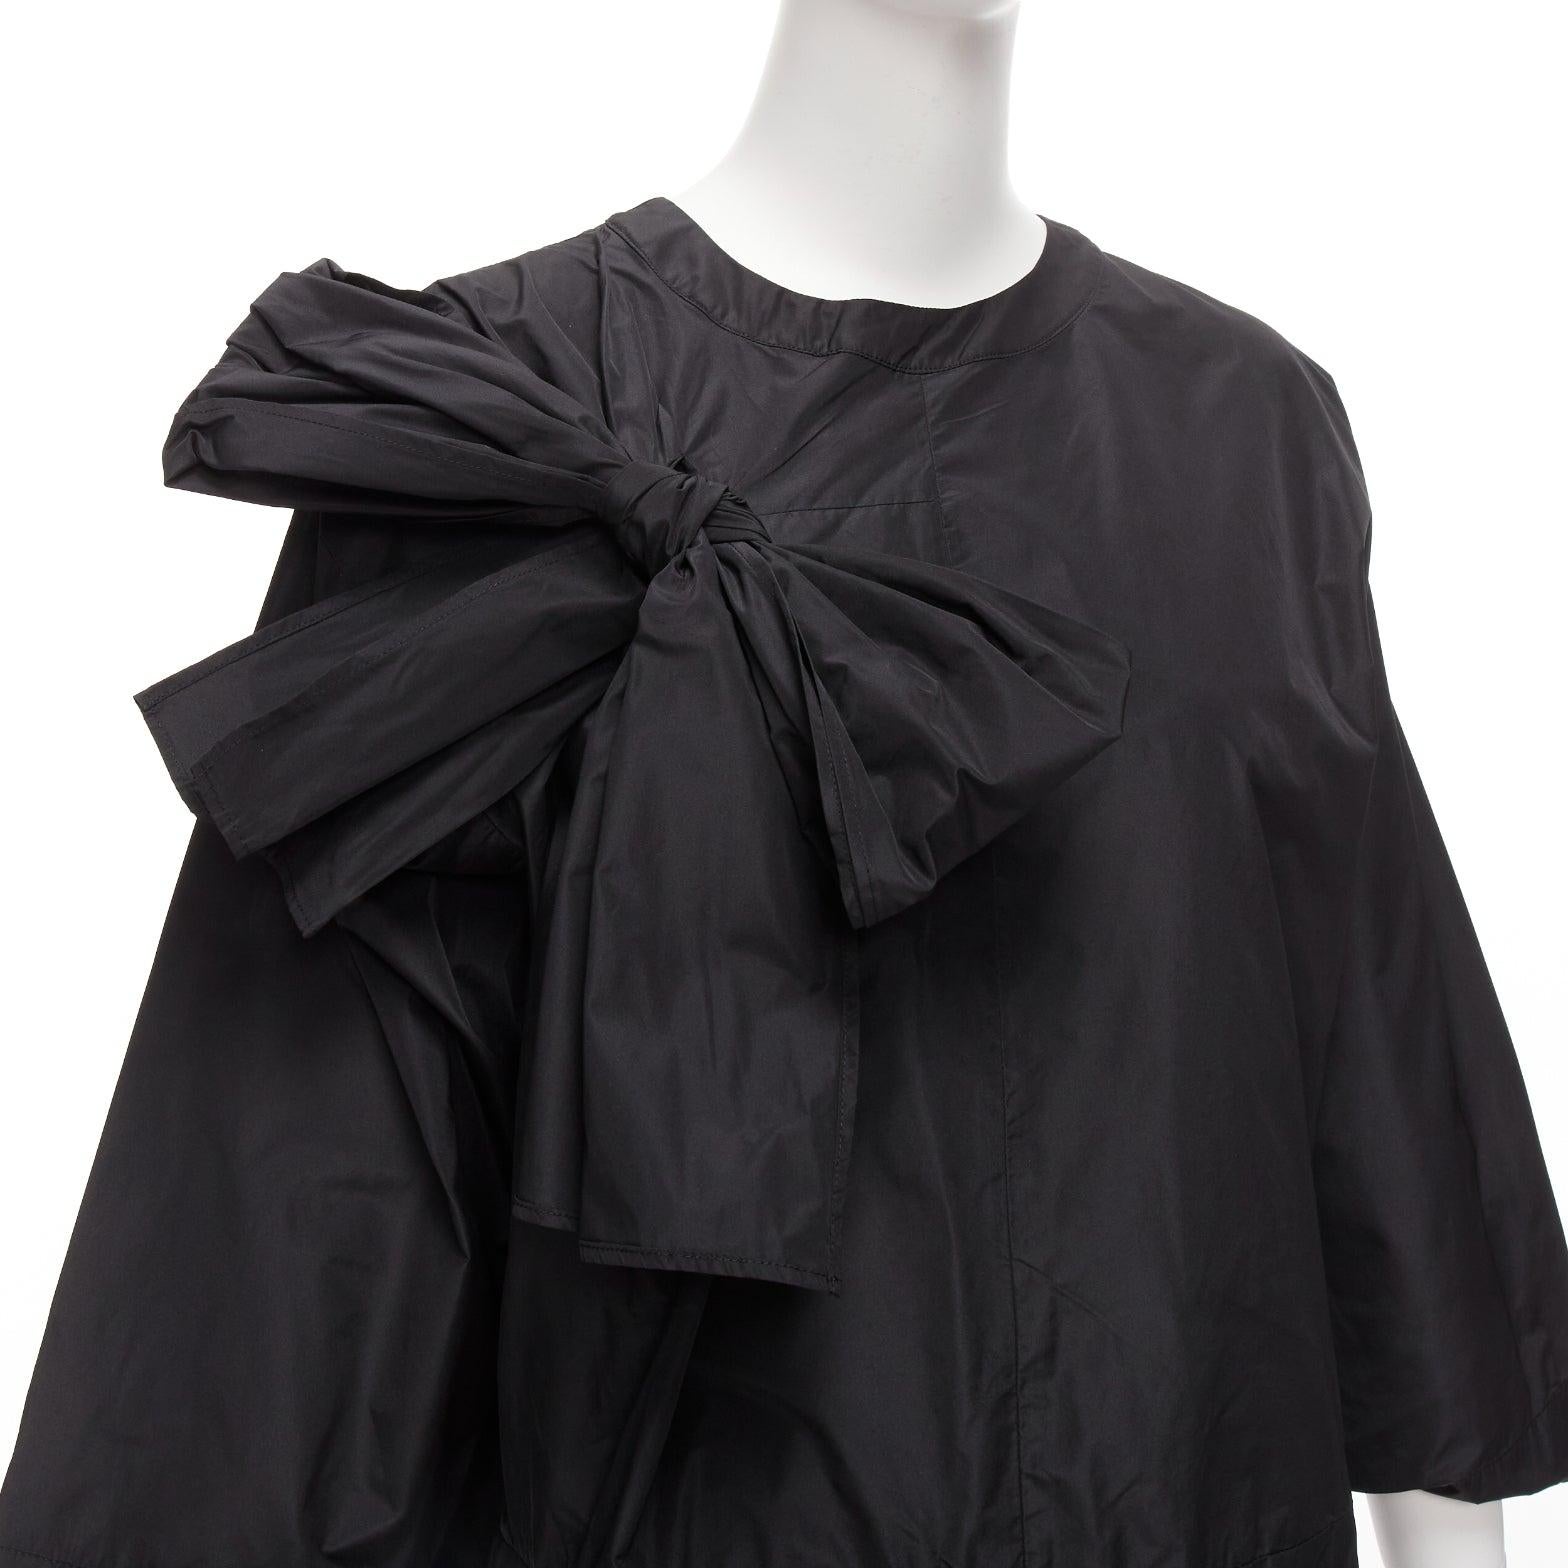 DRIES VAN NOTEN black bow detail chest panelled keyhole tent dress FR36 S
Reference: DYTG/A00028
Brand: Dries Van Noten
Material: Polyester
Color: Black
Pattern: Solid
Closure: Keyhole Button
Extra Details: dress in black featuring round neckline,